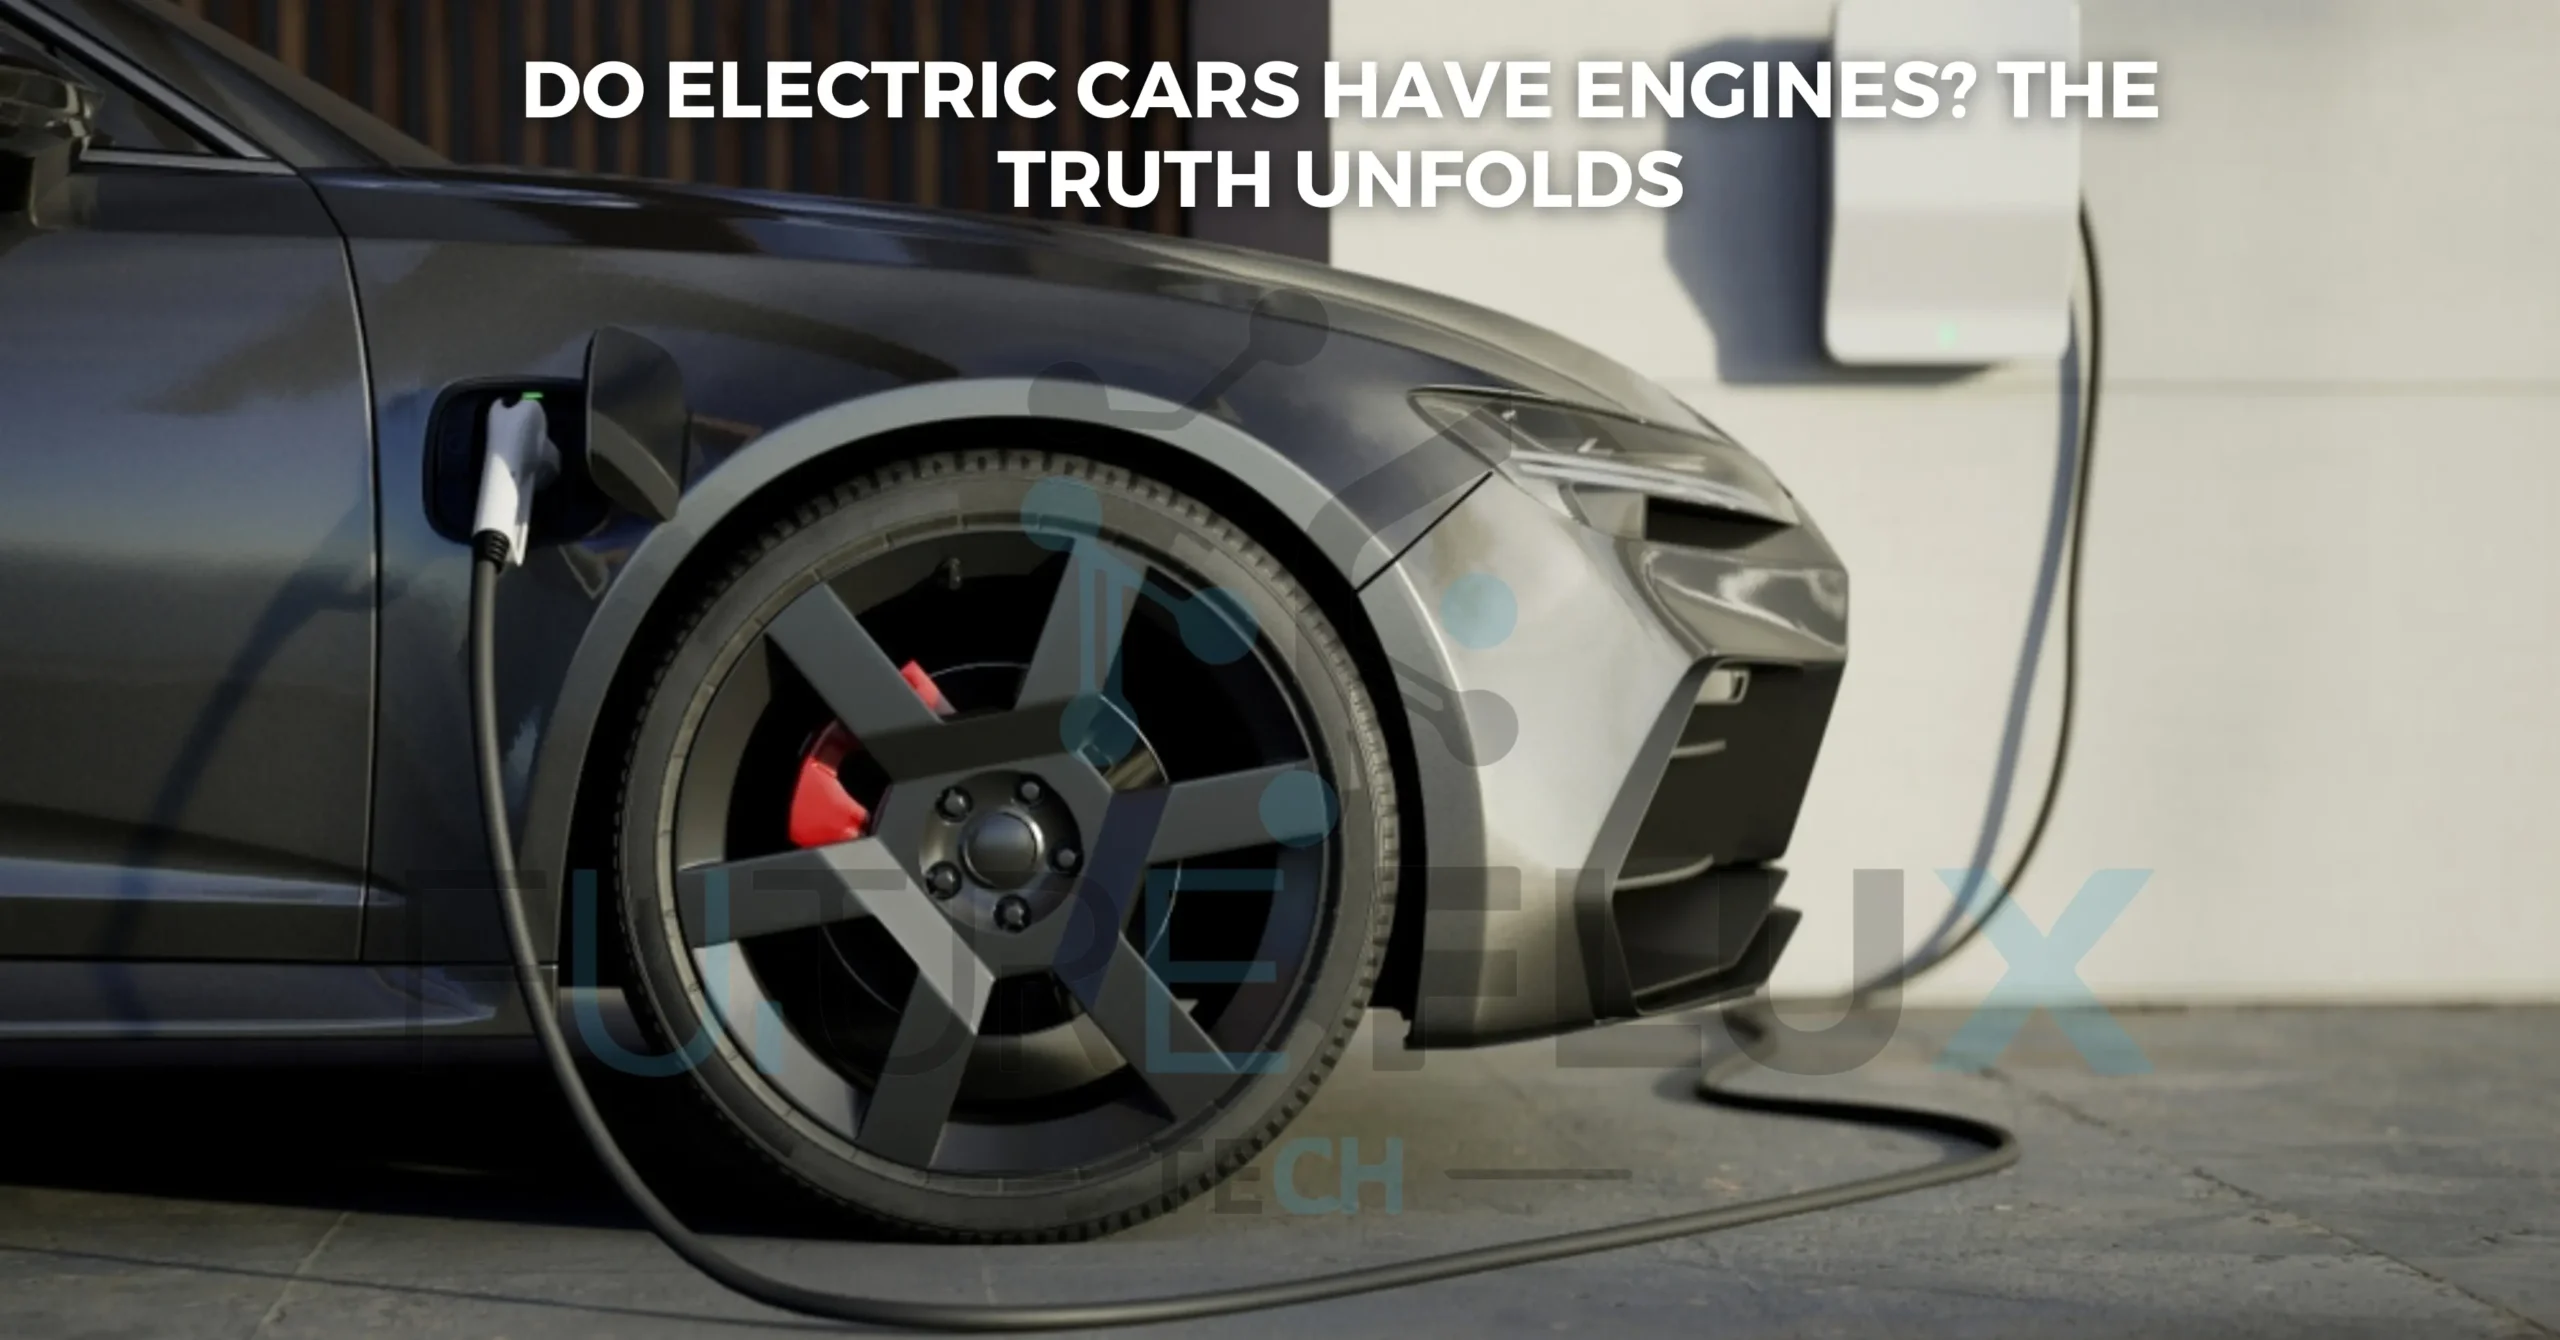 Do Electric Cars have Engines? The Truth Unfolds